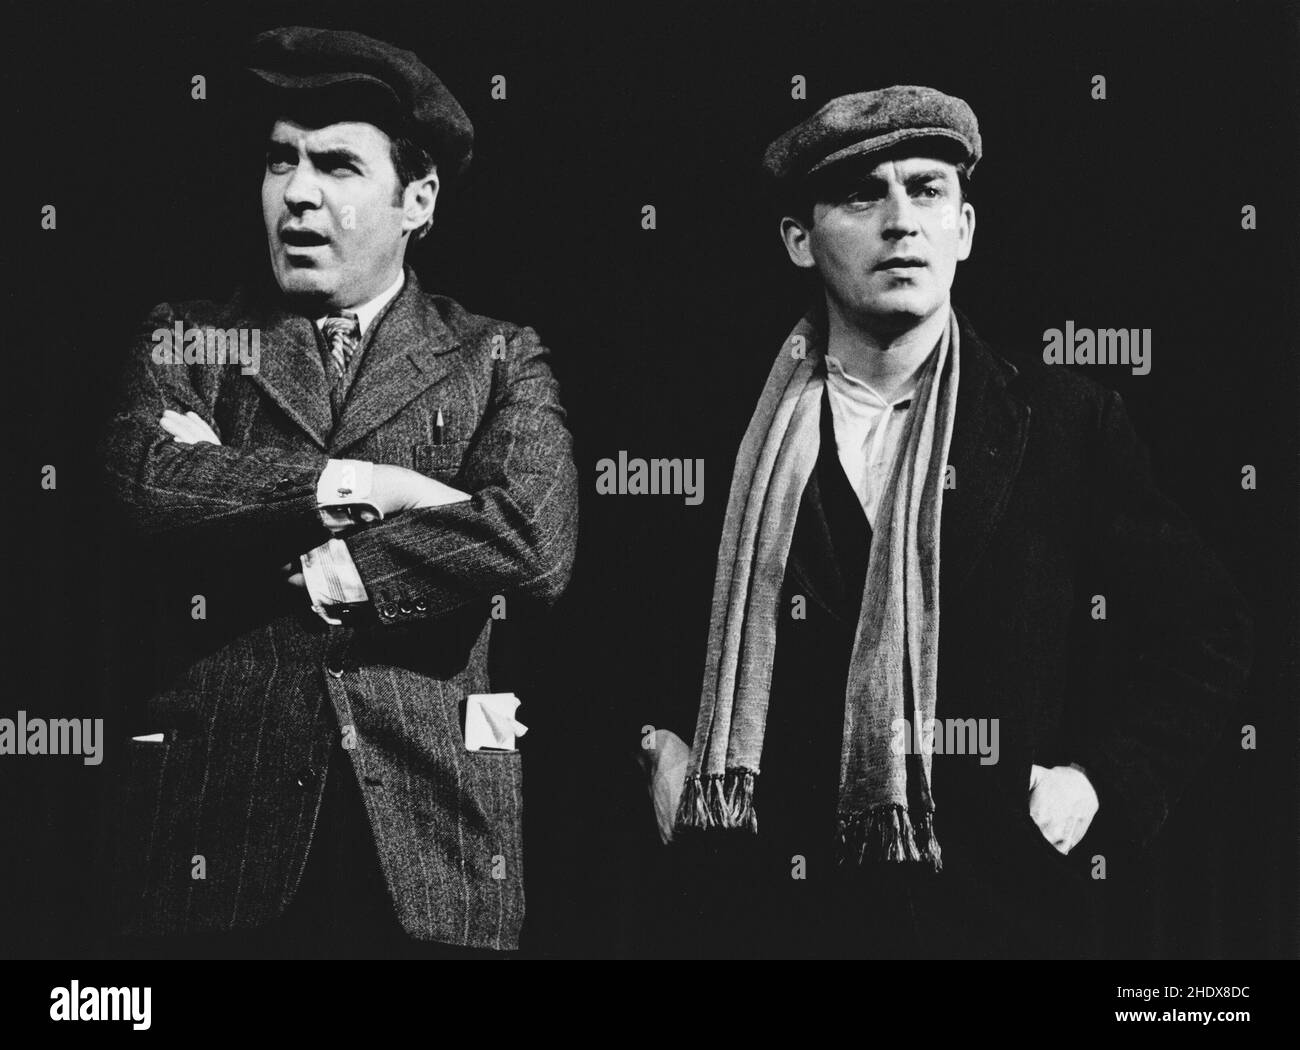 l-r: John Cairney (Charlie McGrath), James Grant (Willie Rough) in WILLIE ROUGH by Bill Bryden at the Shaw Theatre, London NW1  17/01/1973  a Royal Lyceum Theatre Company production  set design: Geoffrey Scott  costumes: Deirdre Clancy  lighting: Andre Tammes  director: Bill Bryden Stock Photo